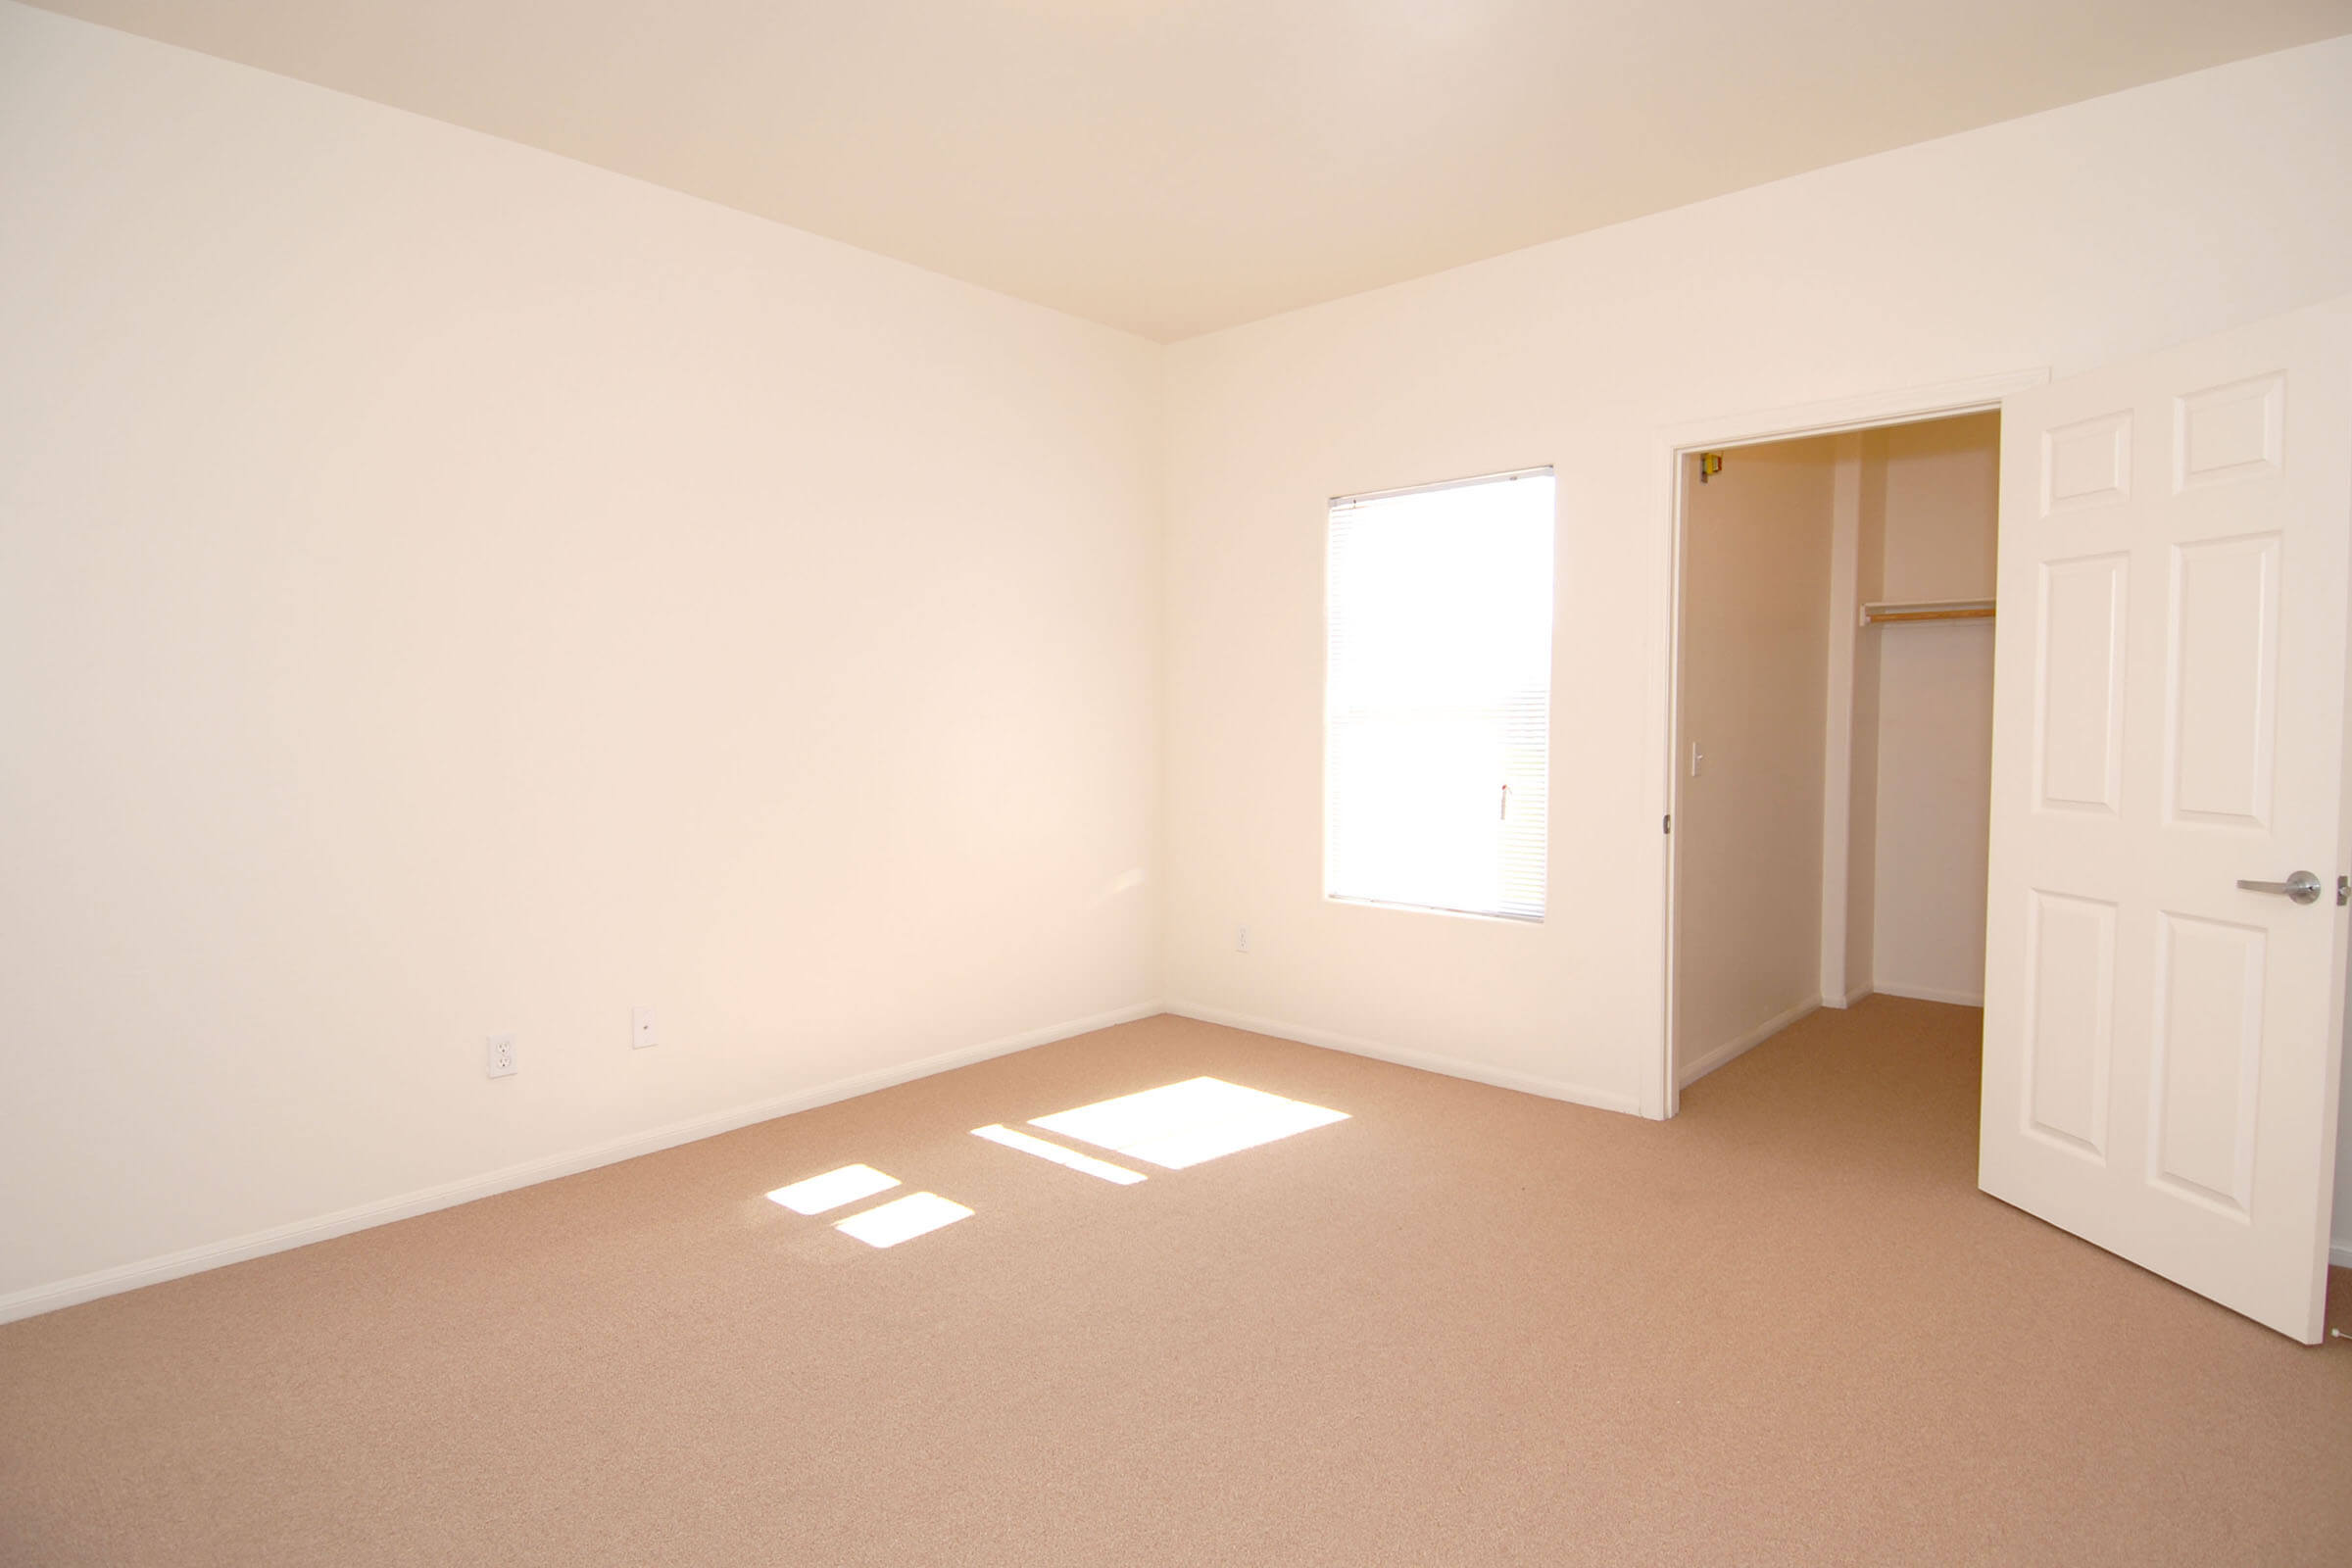 vacant bedroom with carpet